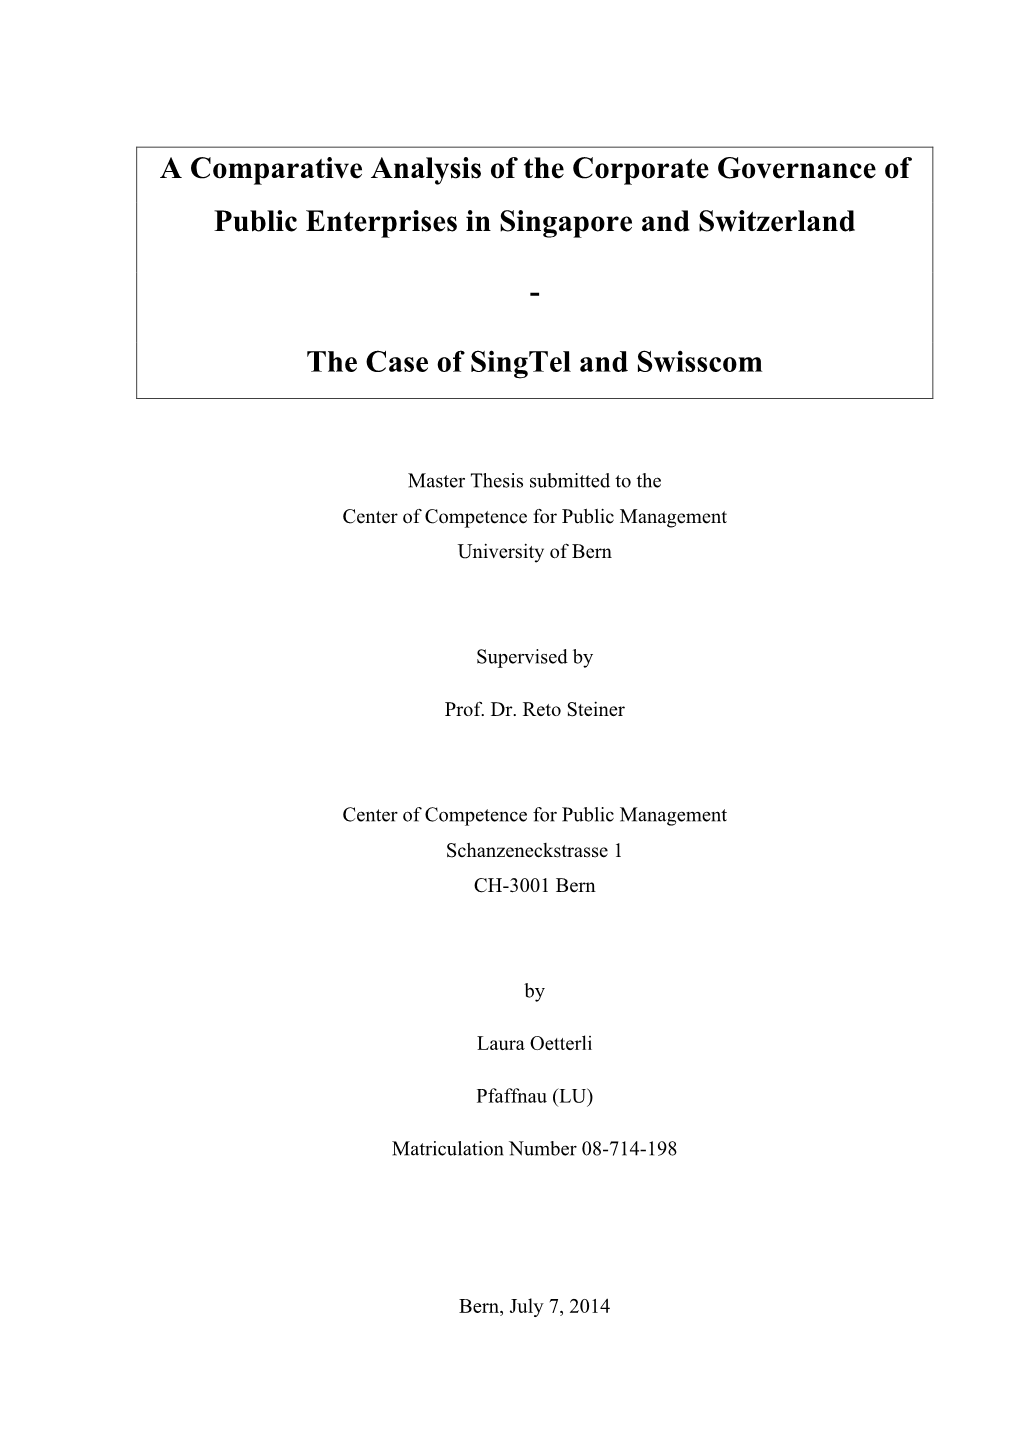 A Comparative Analysis of the Corporate Governance of Public Enterprises in Singapore and Switzerland